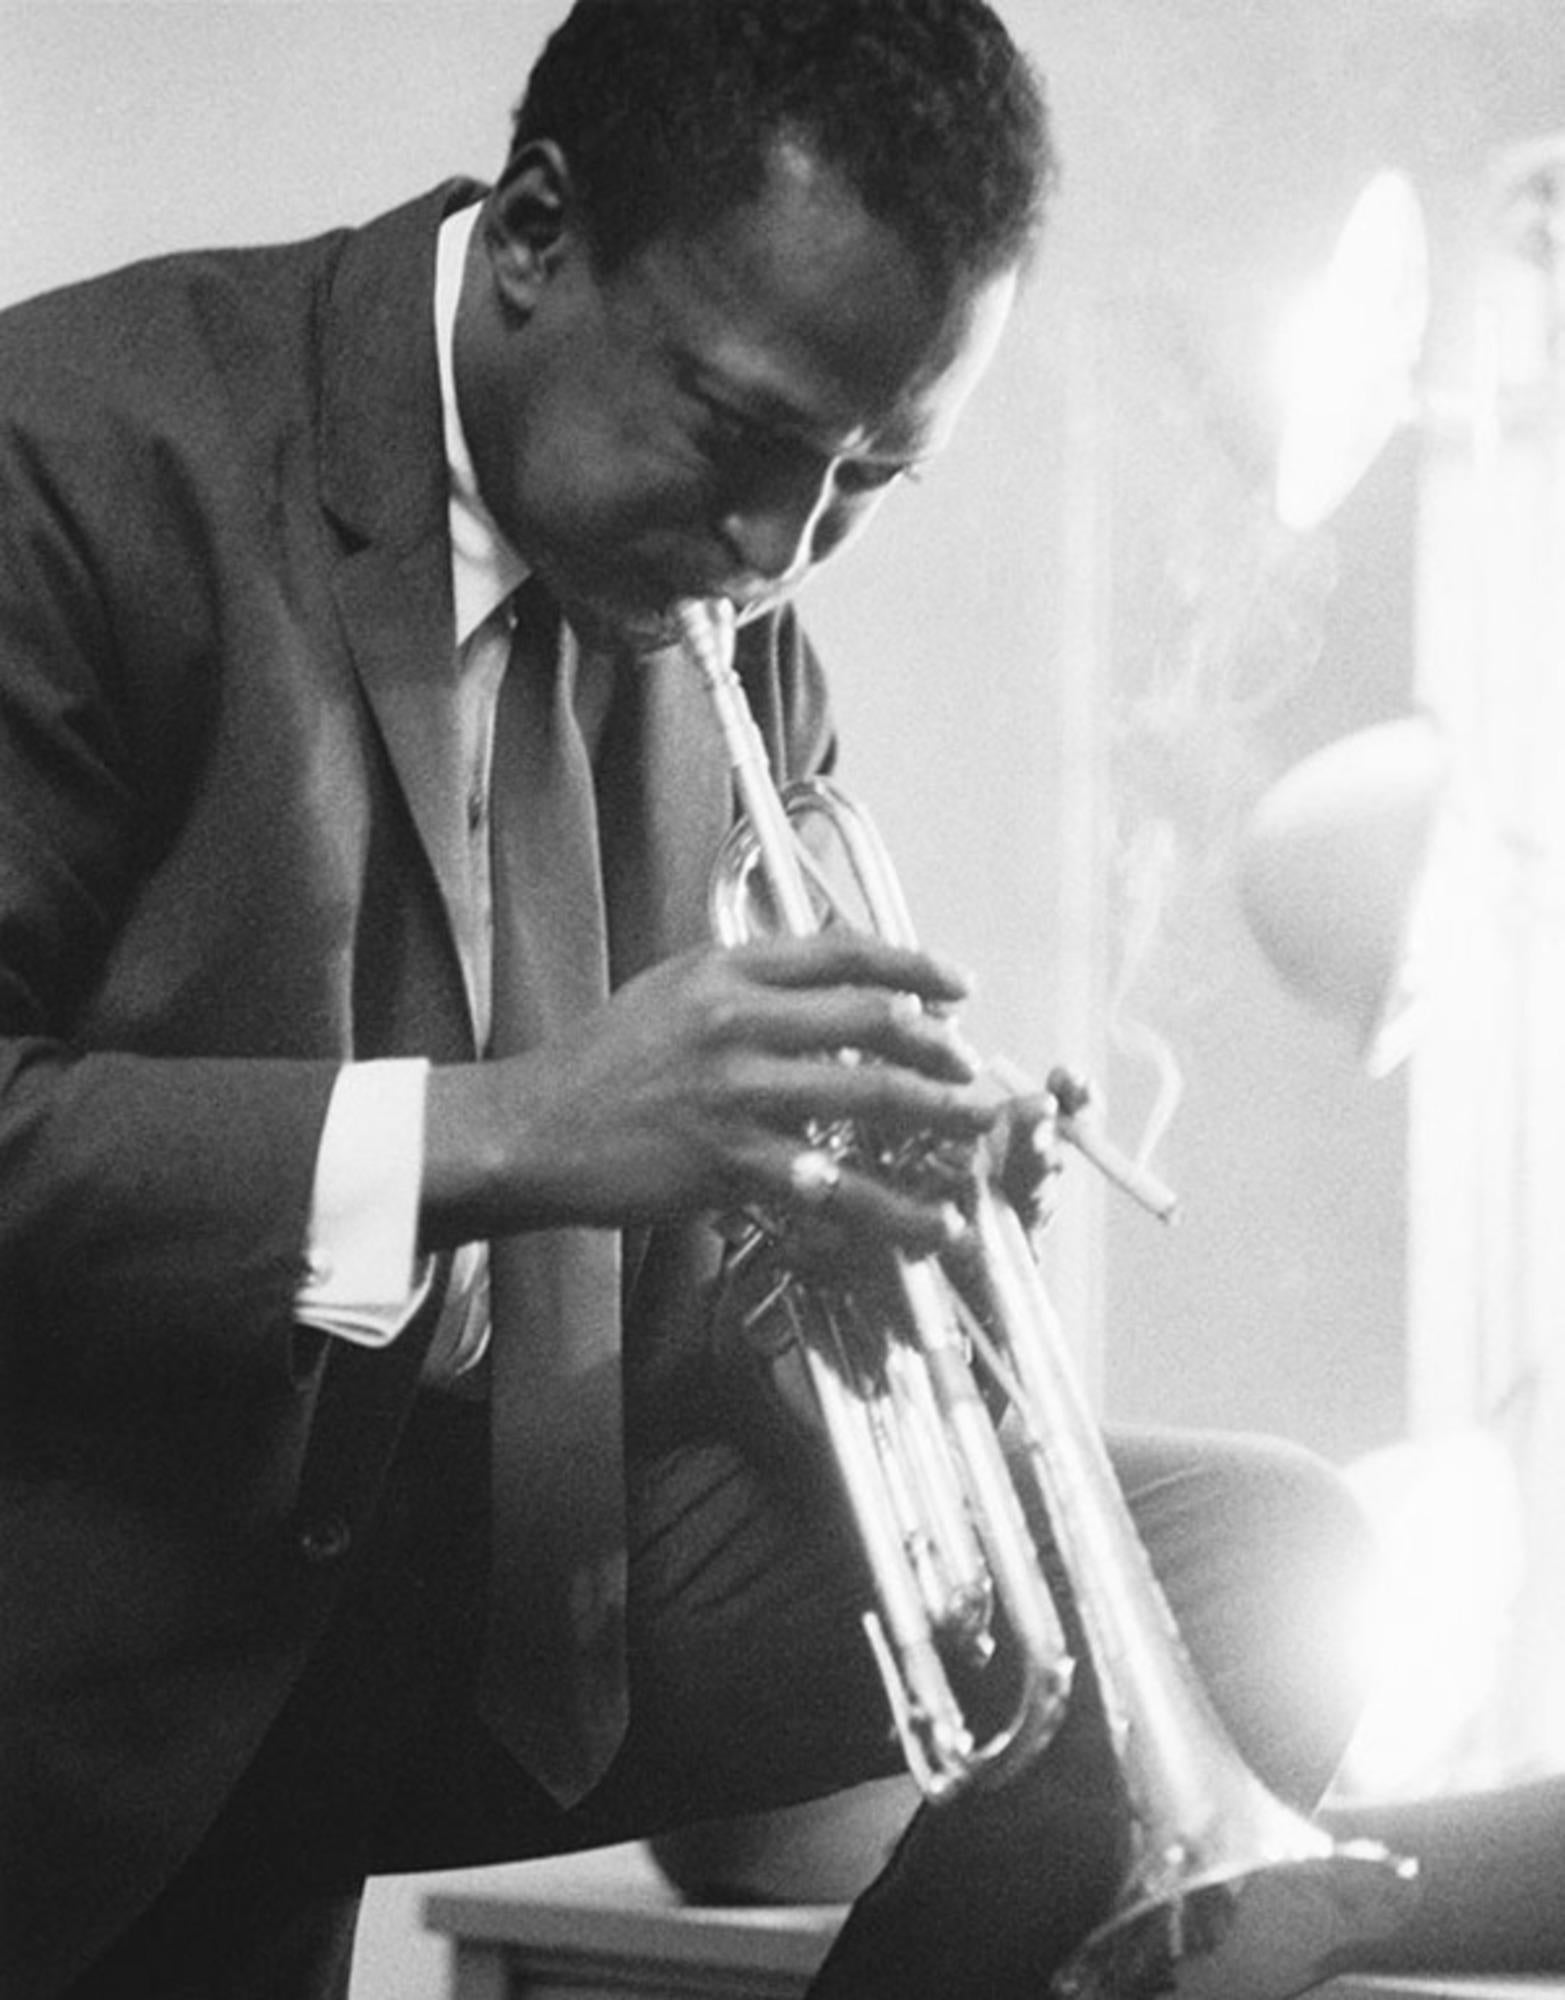 Estate-stamped, gelatin-print silver

American jazz musician, bandleader and composer Miles Davis playing the trumpet in a dressing room before a performance.

Available sizes: 
20”x16" Edition of 25
24”x20" Edition of 25
40”x30" Edition of